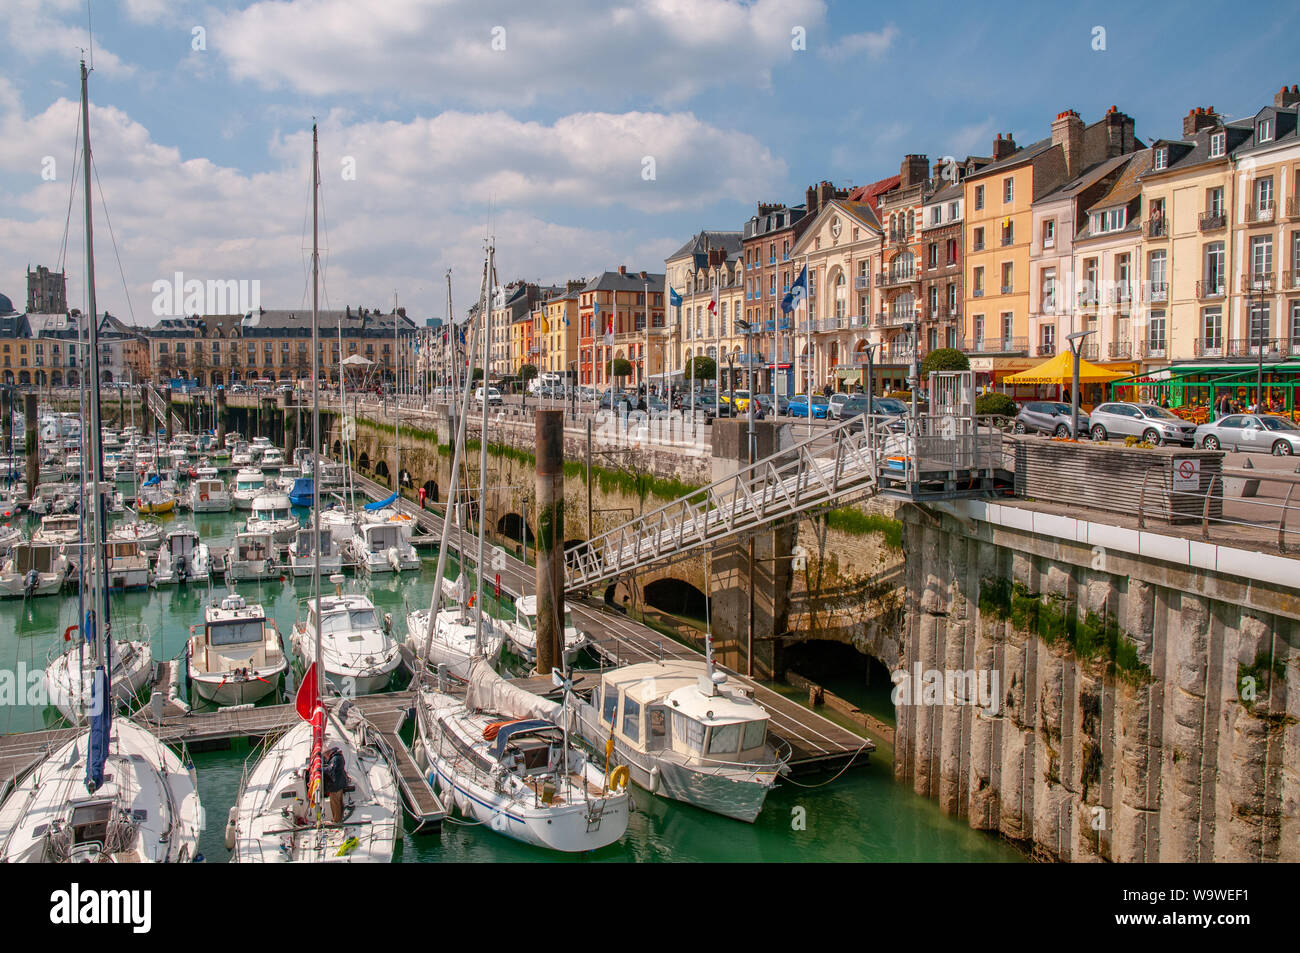 Various sailboats, yachts and leisure boats moored along the Henry IV quay in the Dieppe marina, Normandy France. Stock Photo